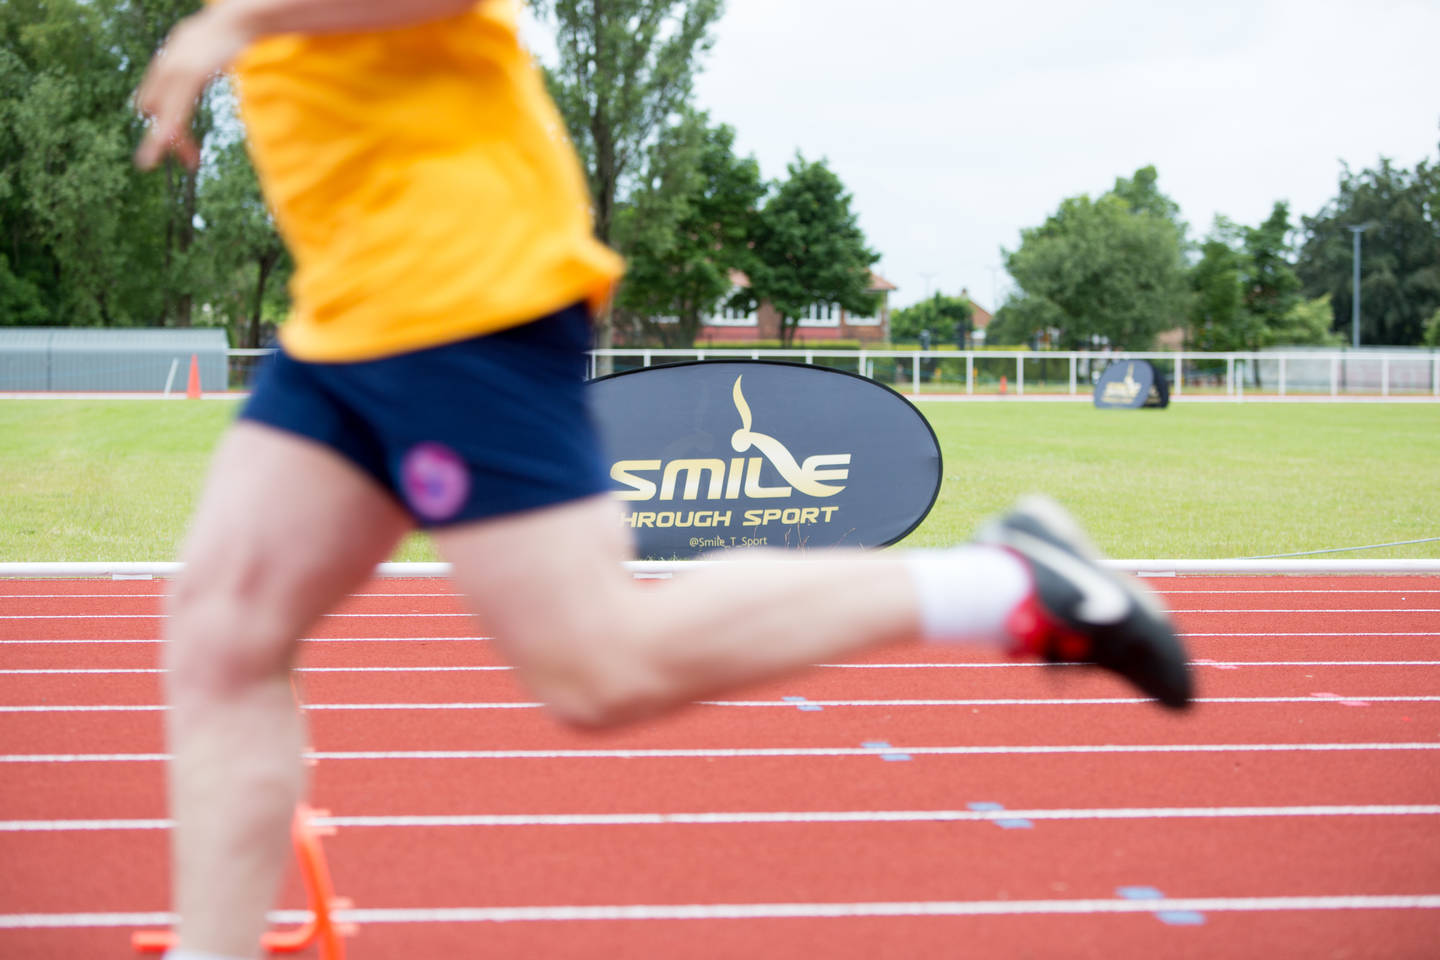 Person running on running track with Smile Through Sport logo in the background. 